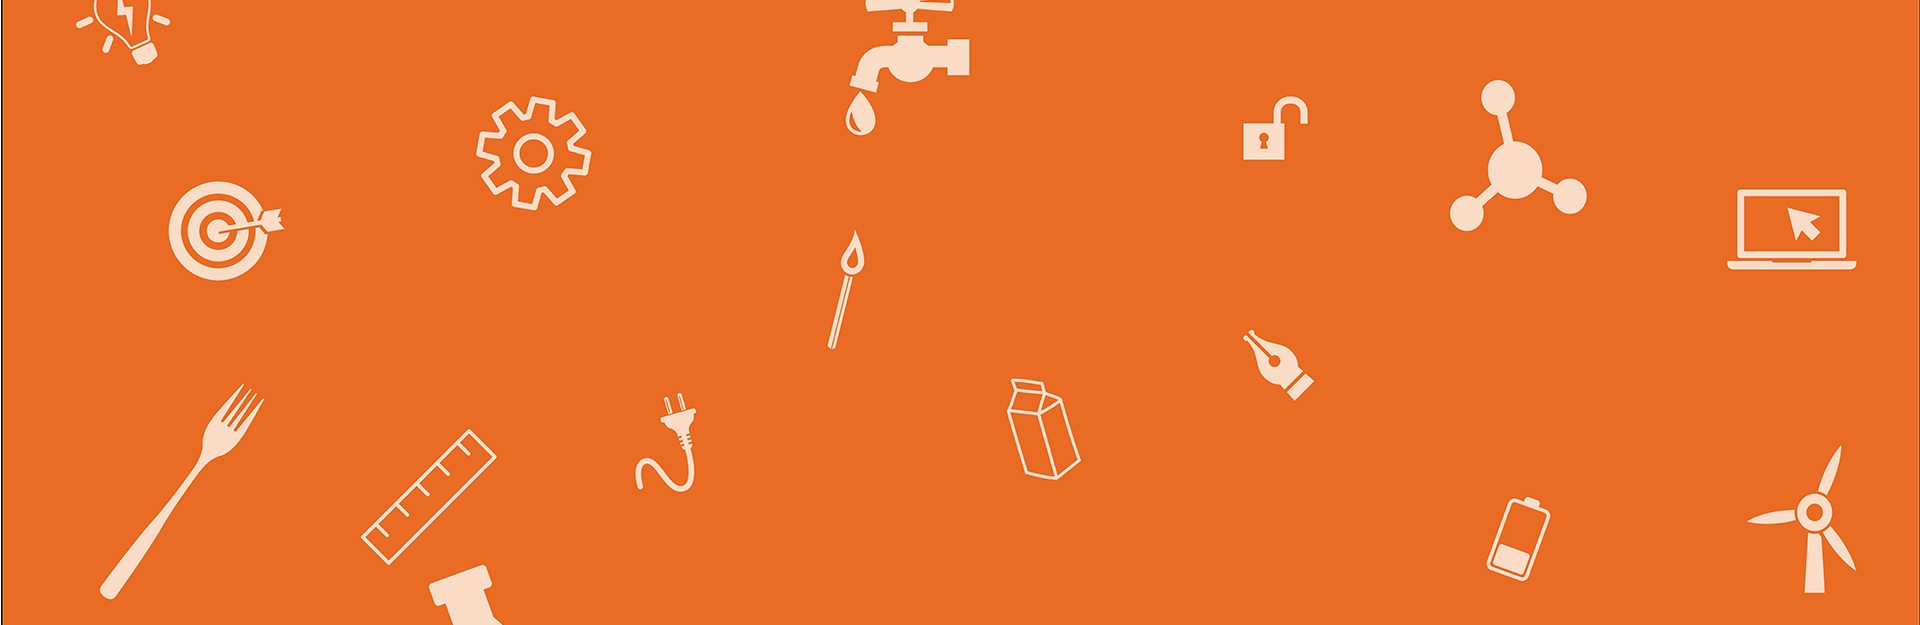 a variety of icons on an orange background